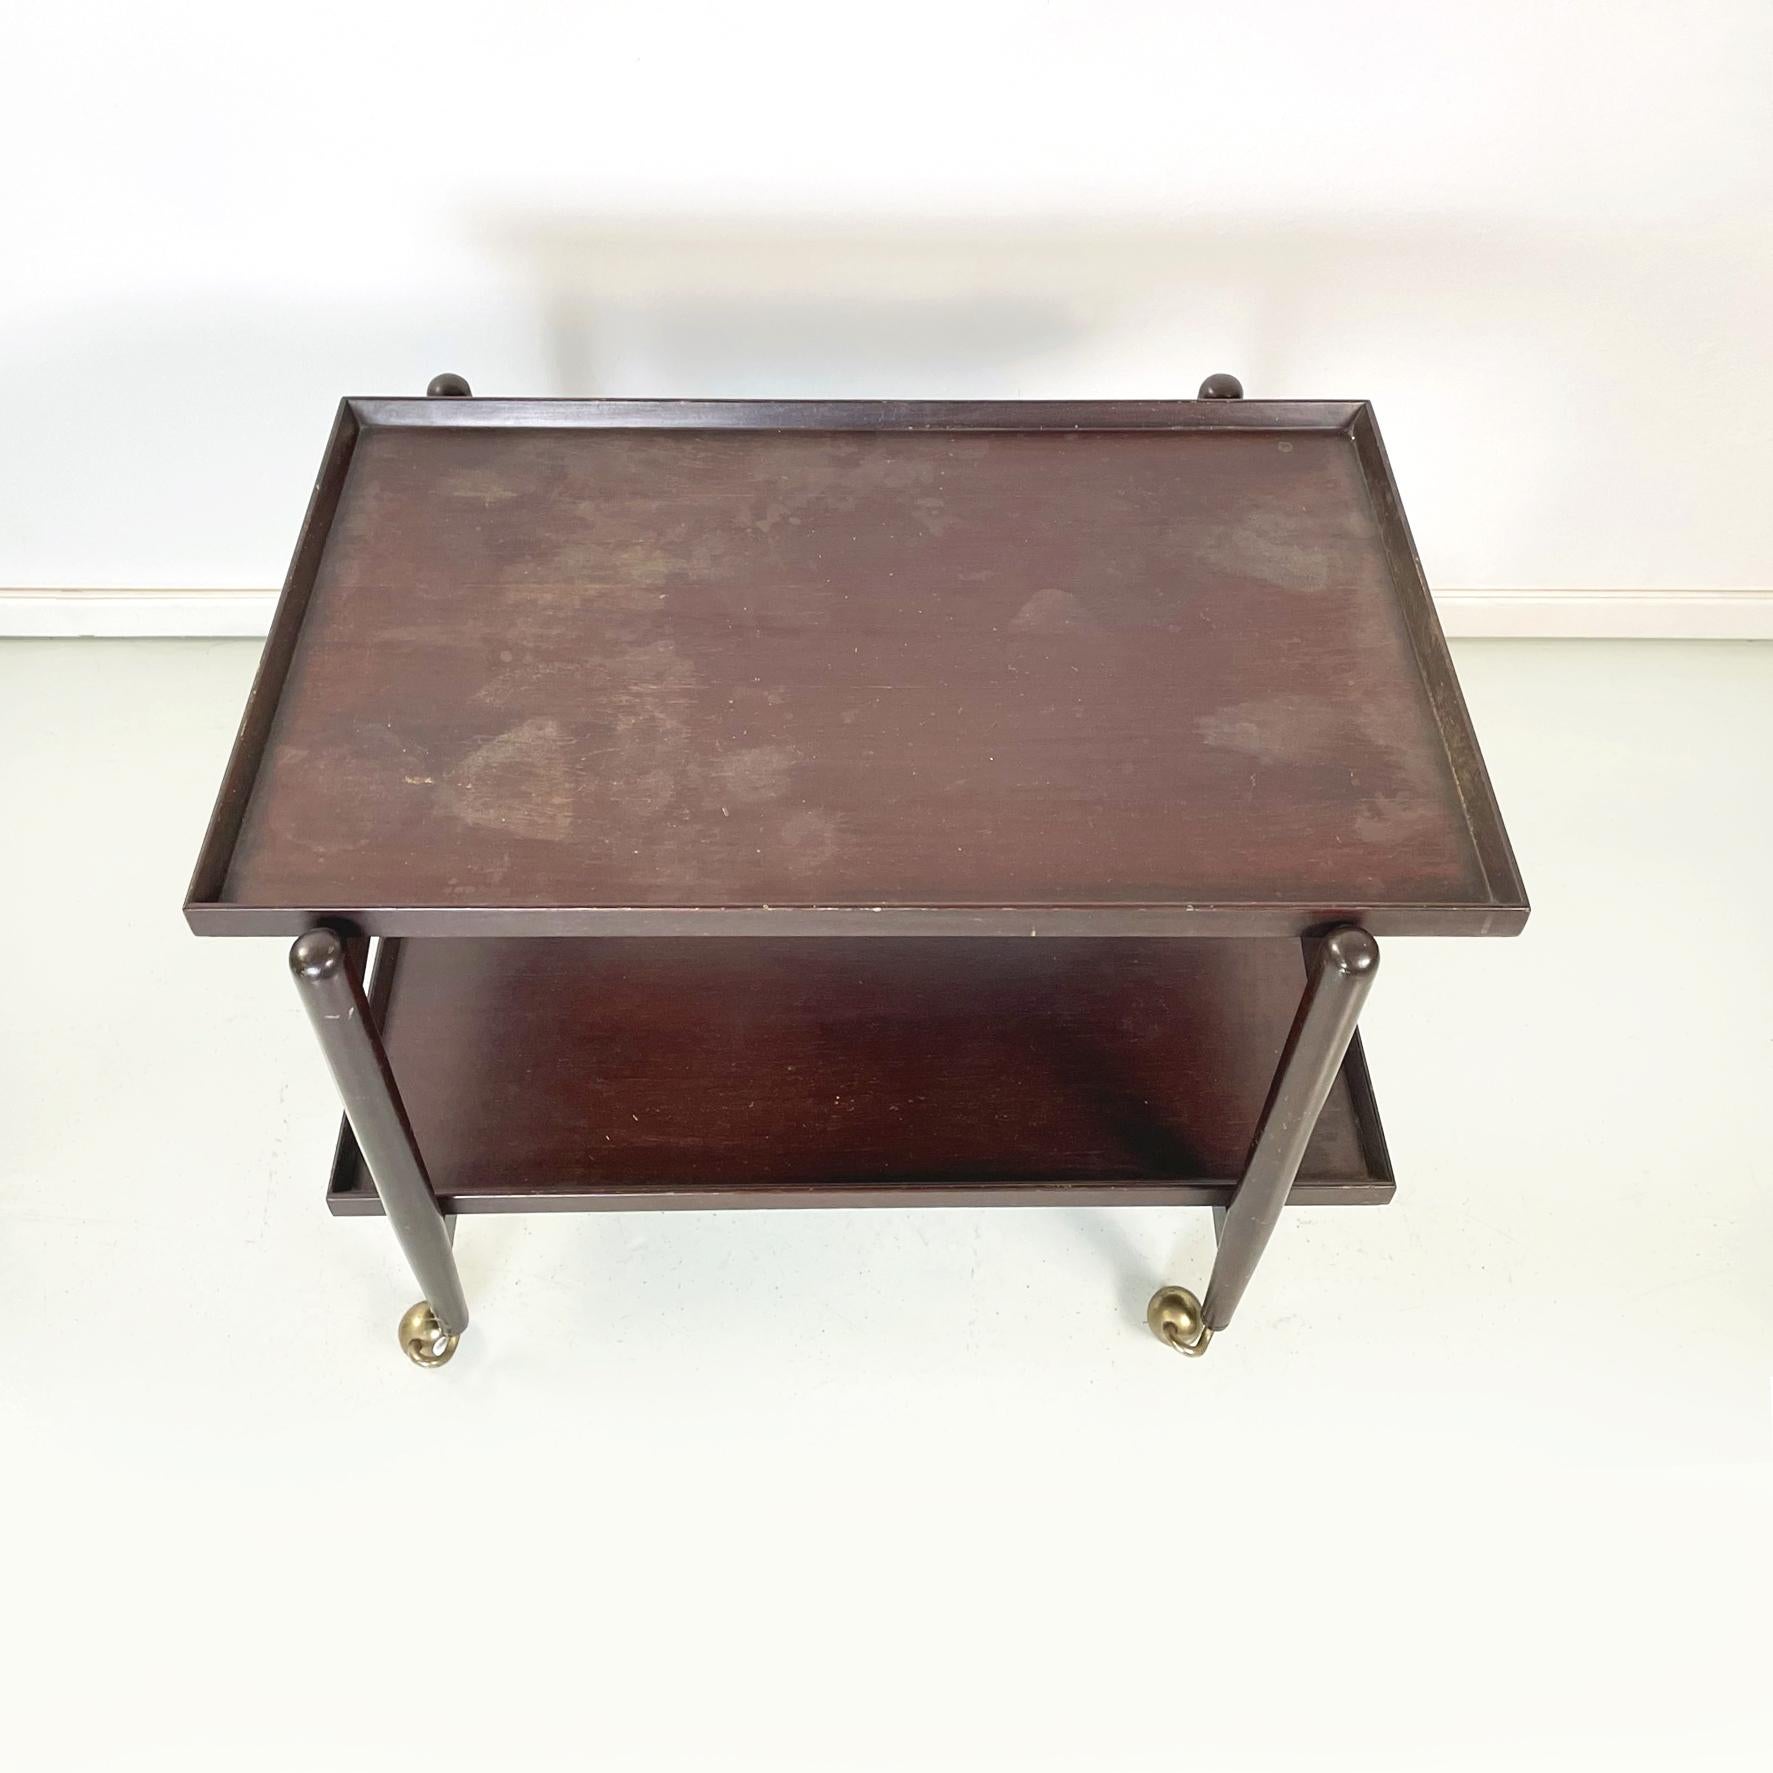 Mid-20th Century Italian Midcentury Dark Wooden Cart with Sliding Shelves and Brass Wheels 1960s For Sale